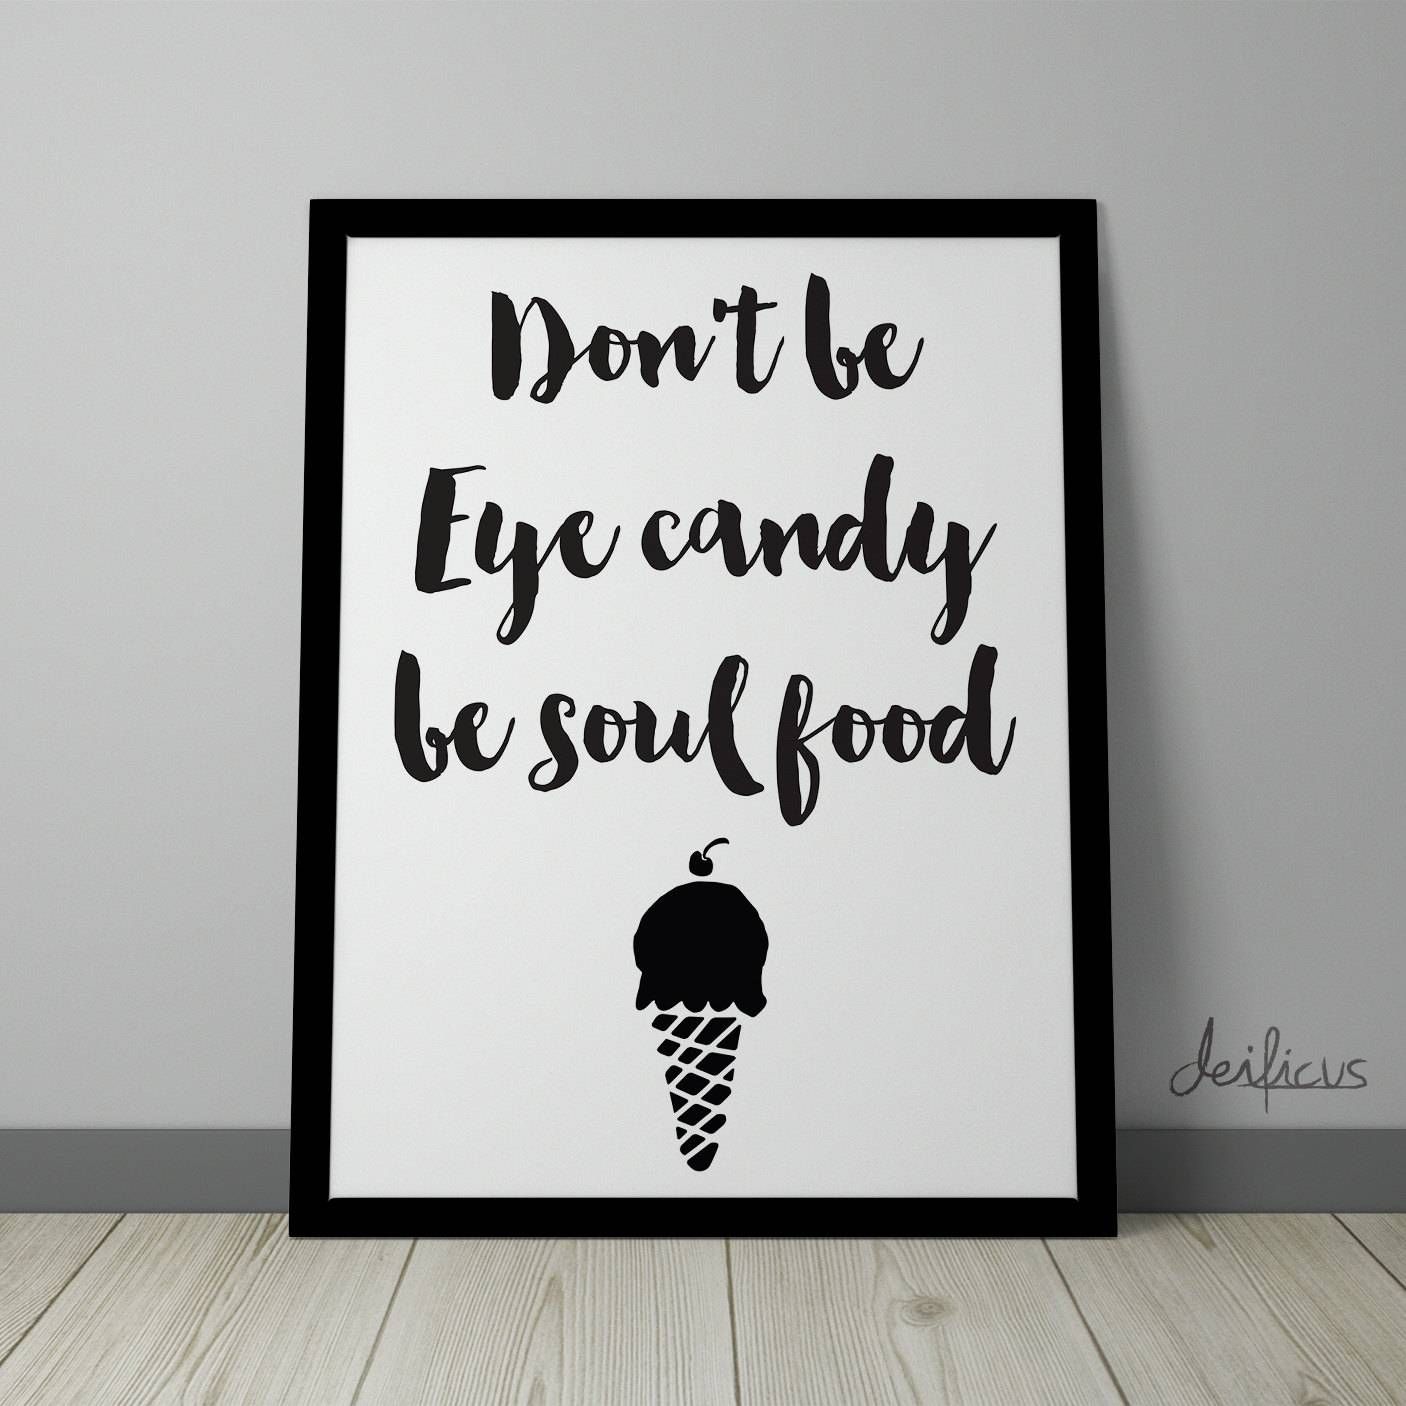 Don't Be Eye Candy Be Soul Food Digital Art Print Within Latest Art Prints To Hang On Your Wall (View 1 of 15)